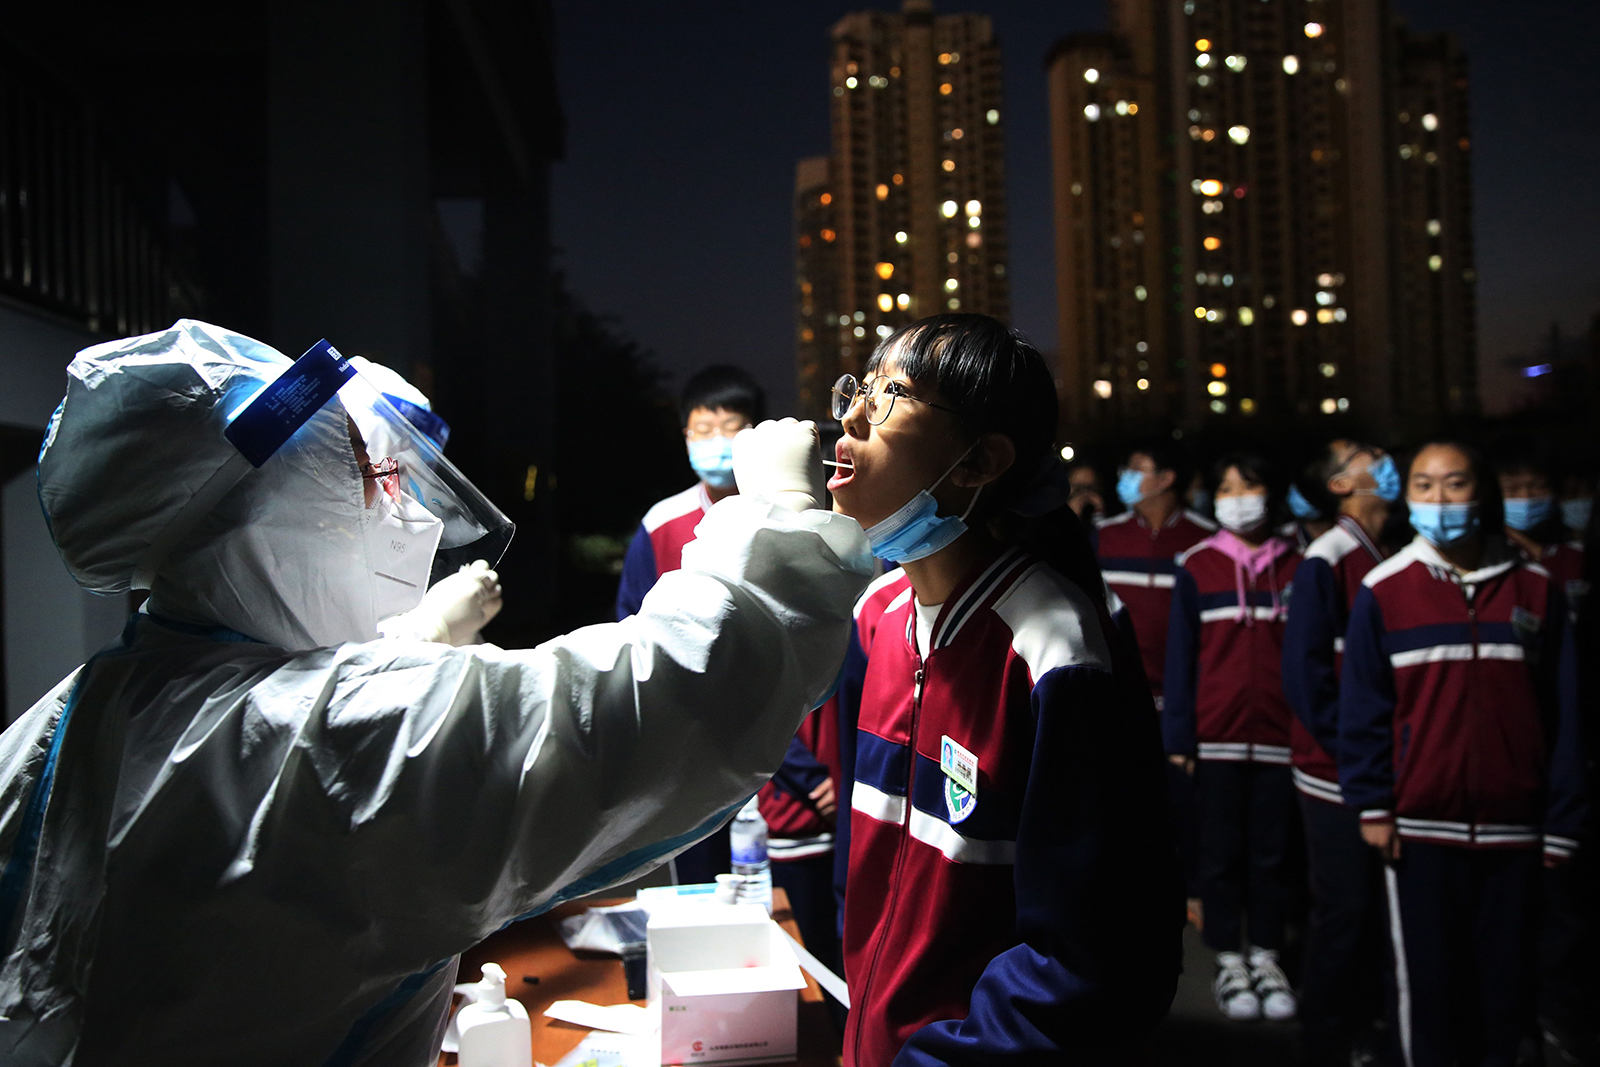 This photo taken on October 12 shows a health worker taking a swab from a middle school student to be tested for Covid-19, as part of a mass testing program following a new coronavirus outbreak in Qingdao, in China's eastern Shandong province. 